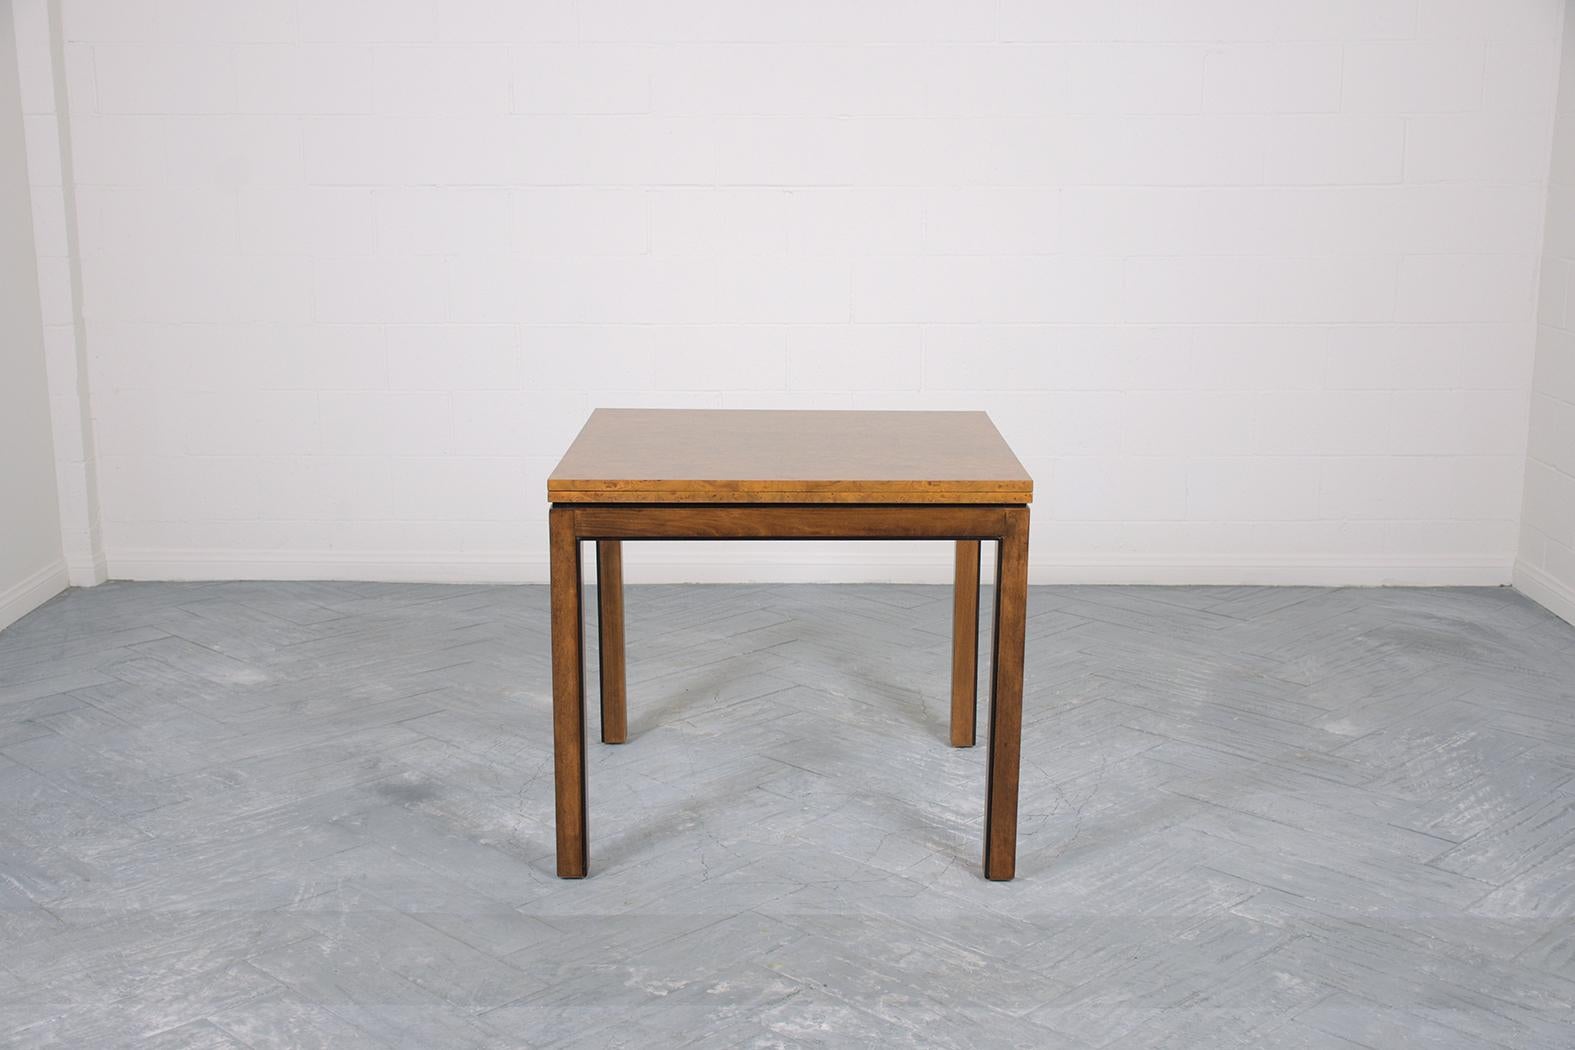 American Mid-Century Modern Extendable Walnut Burled Dining Table with Carved Legs